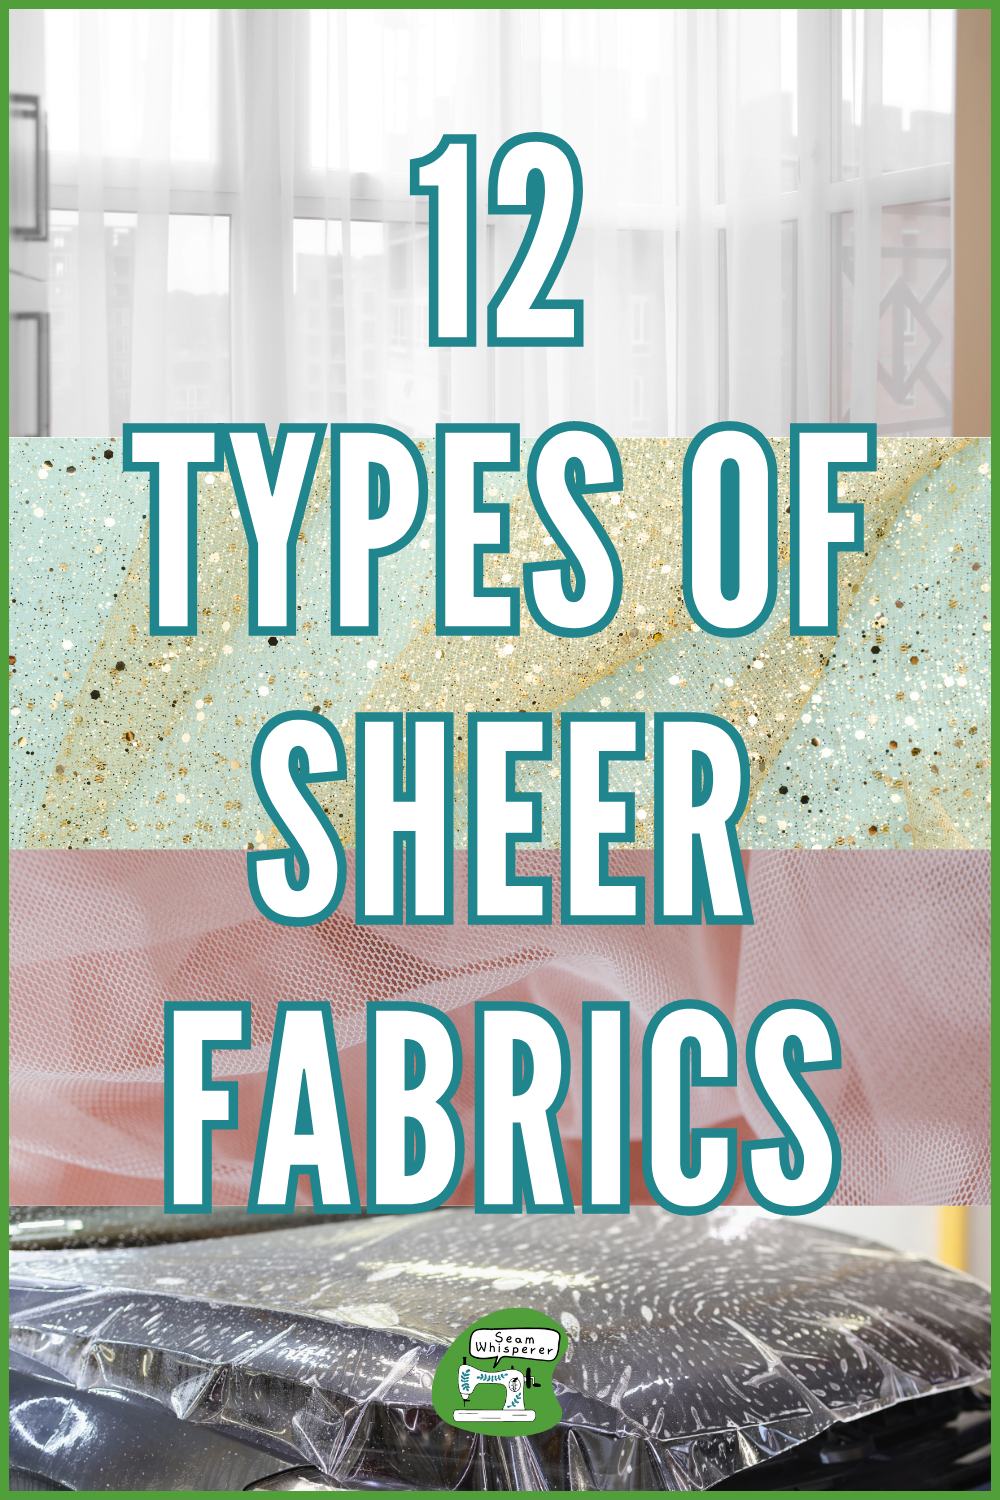 How to design and sew with Thin, Transparent and Sheer Fabrics - Sew Guide